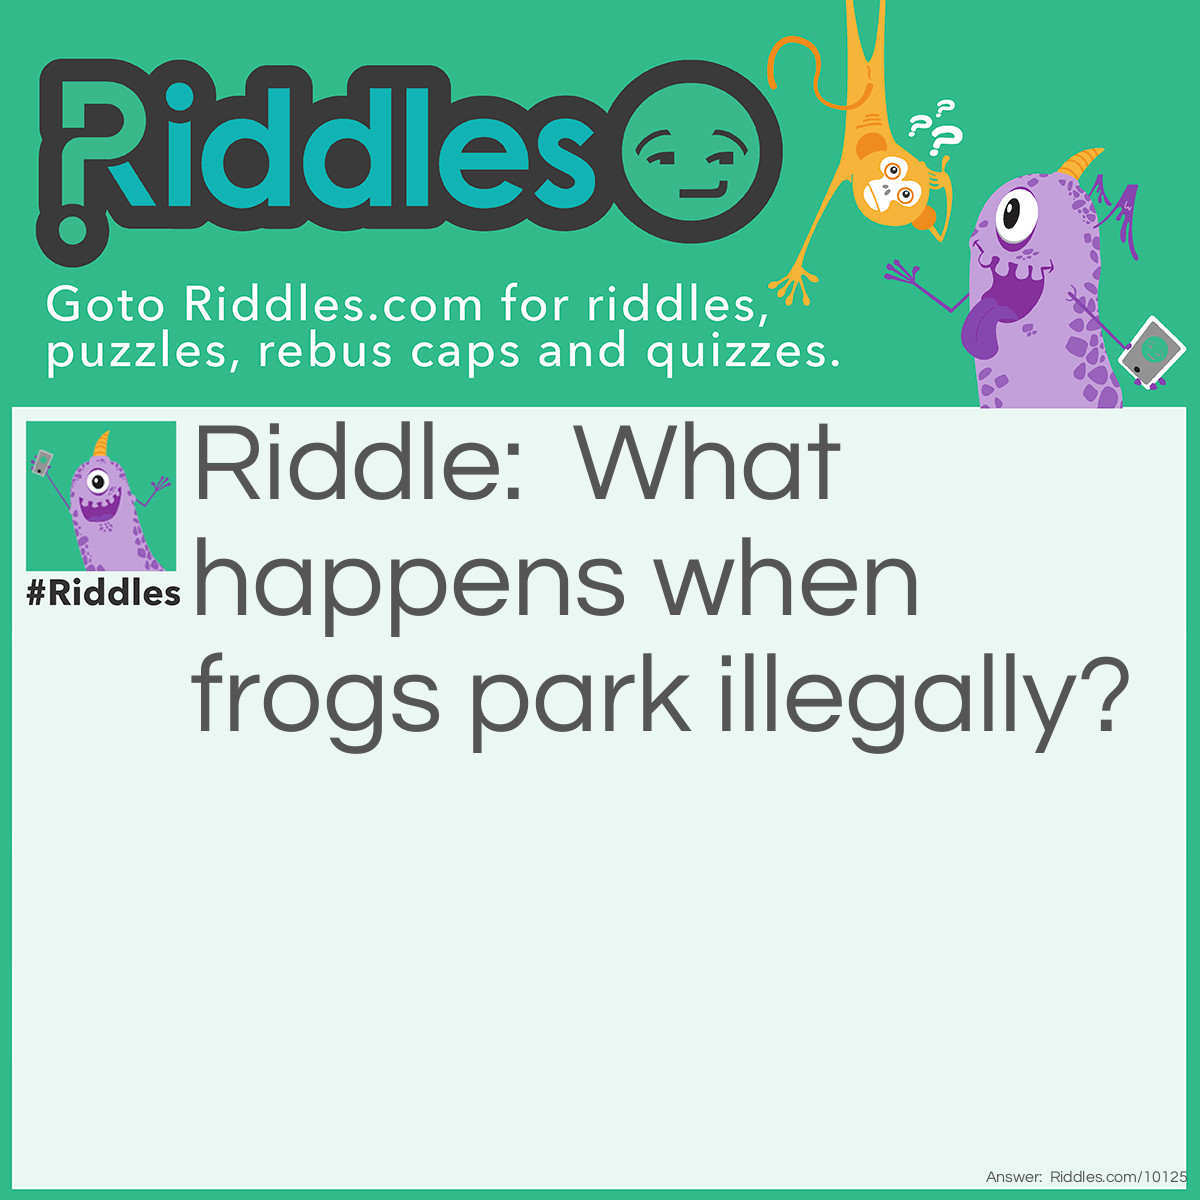 Riddle: What happens when frogs park illegally? Answer: They get toad.